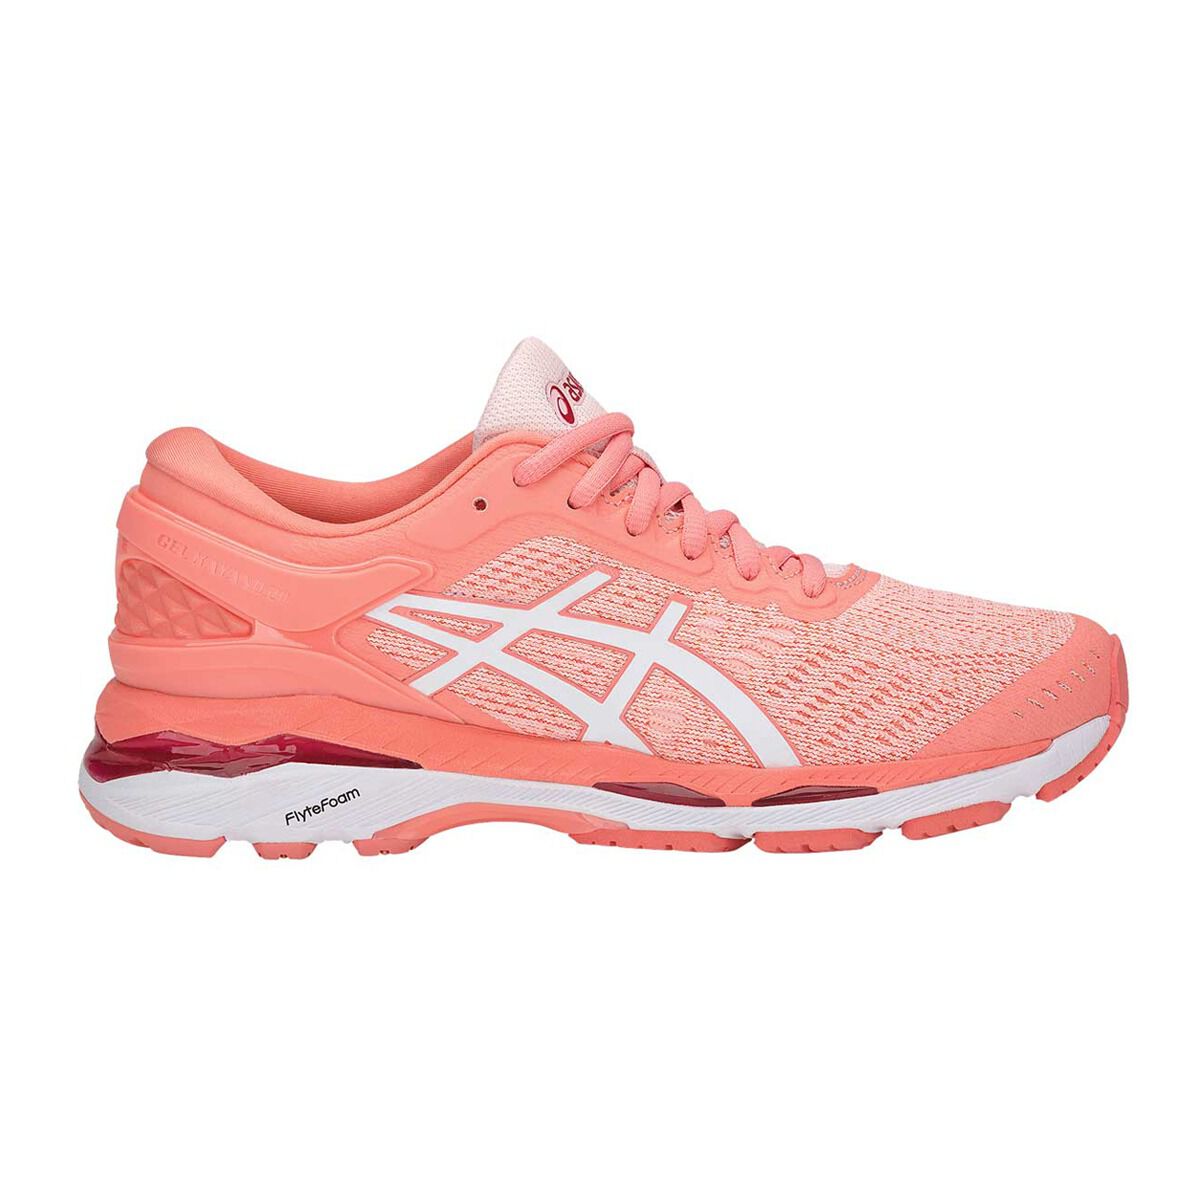 asics pink trainers